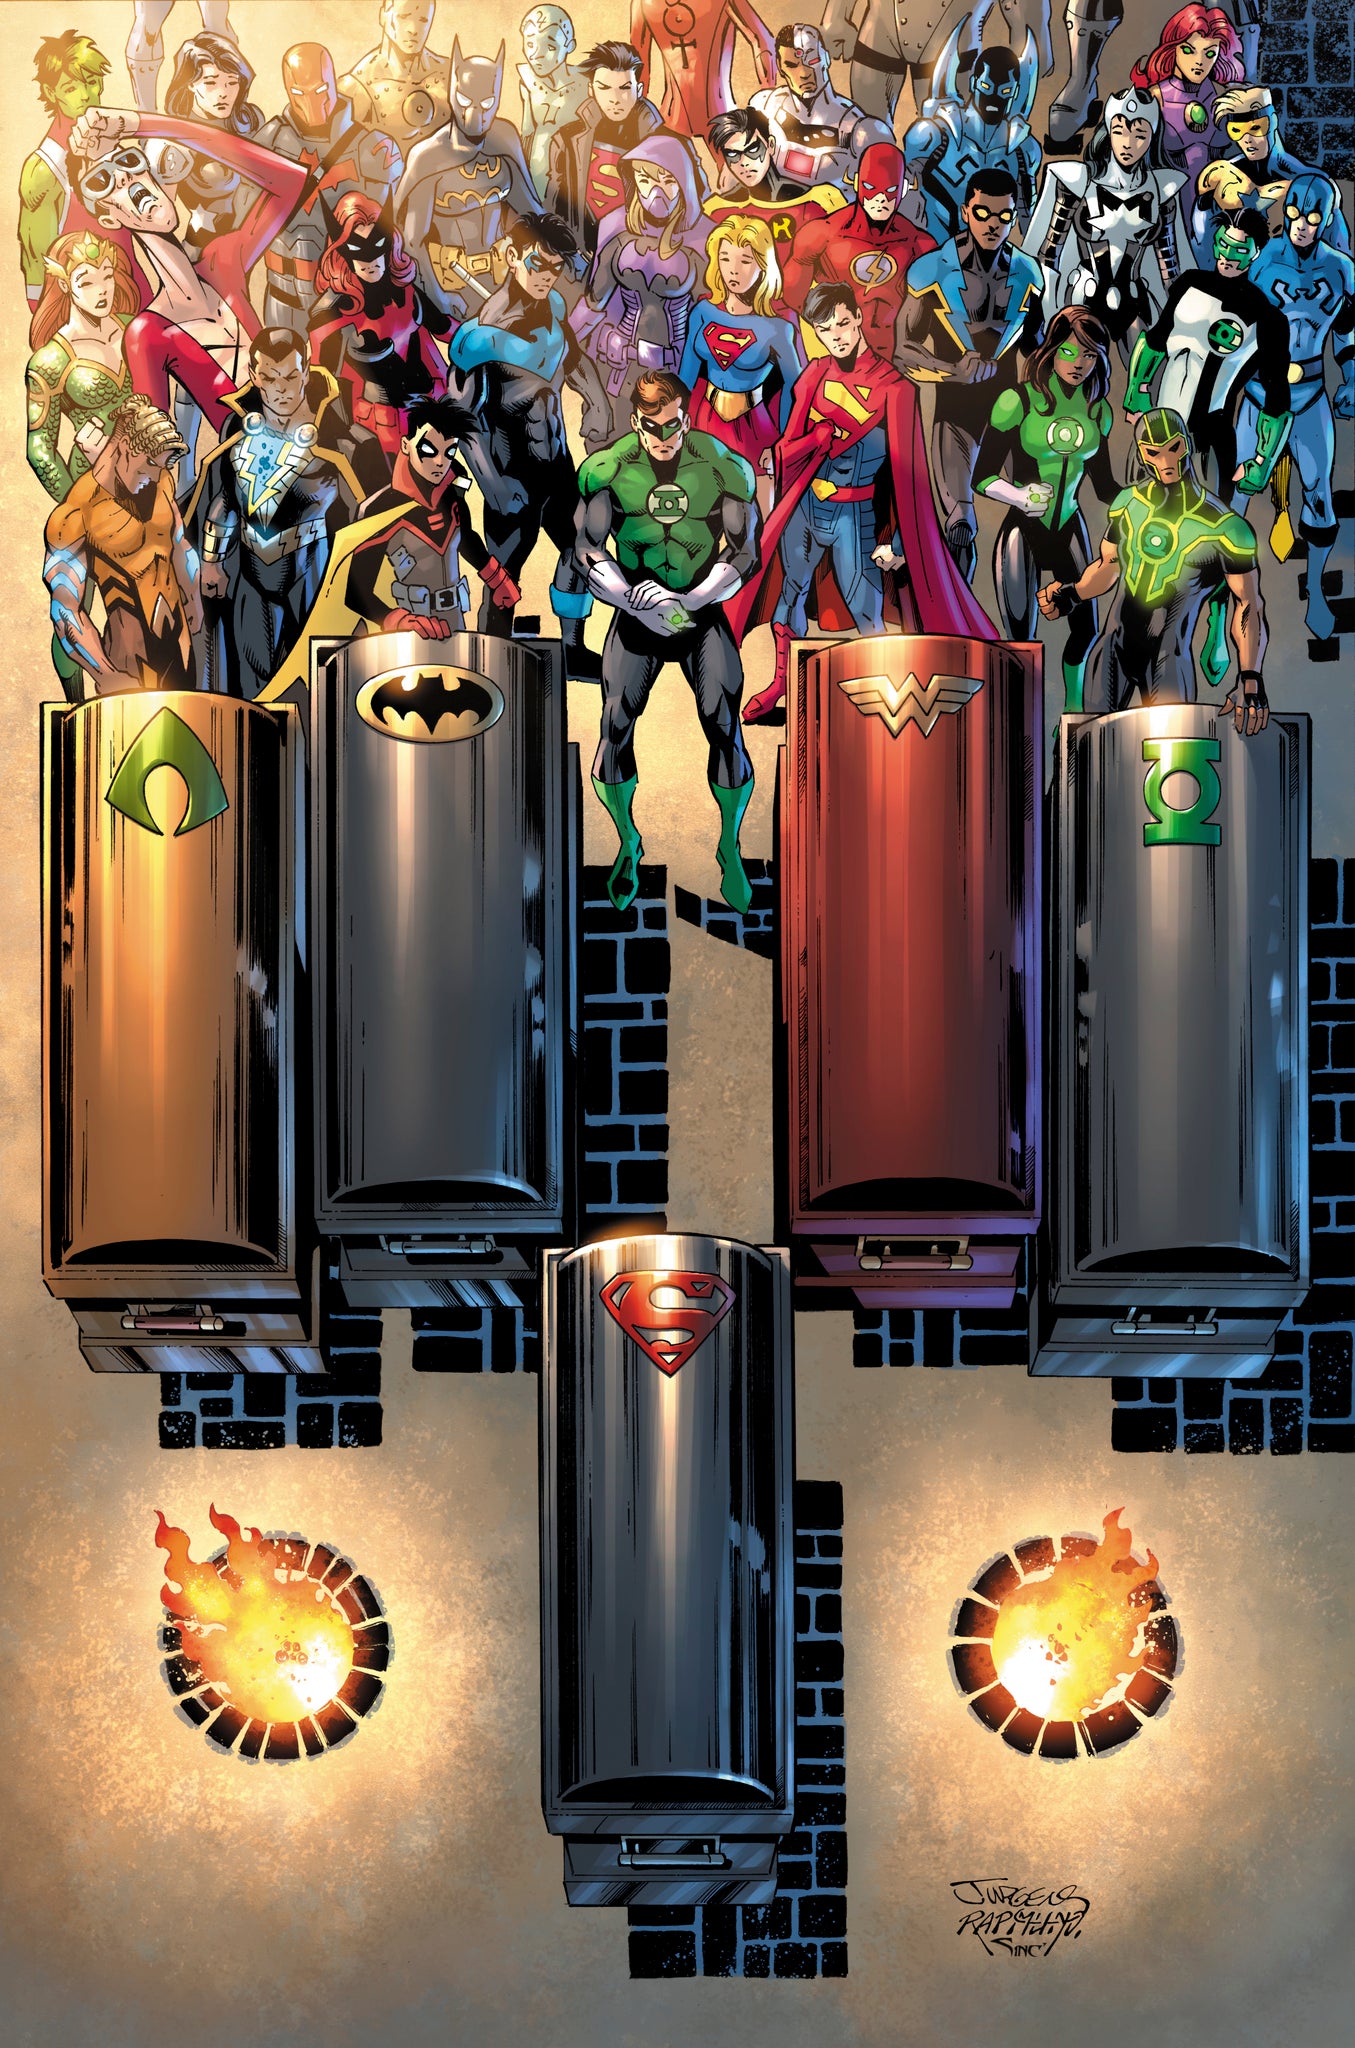 Justice League #75 variant cover by Dan Jurgens and Norm Rapmund. (Image: DC Comics)